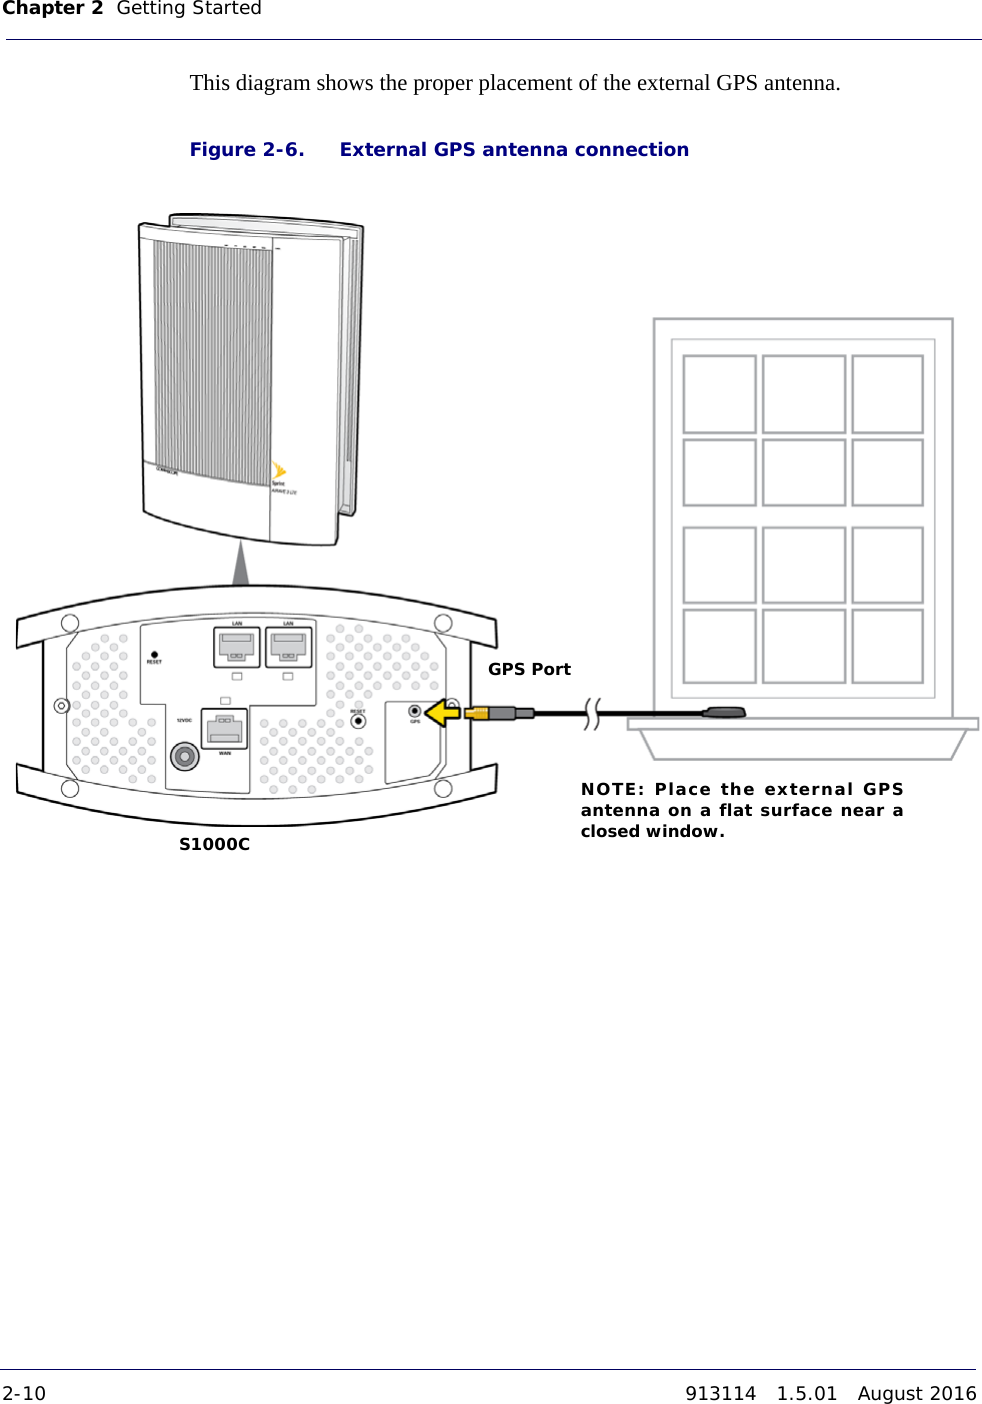 Chapter 2   Getting Started 2-10 913114   1.5.01   August 2016DRAFTThis diagram shows the proper placement of the external GPS antenna.Figure 2-6.NOTE: Place the external GPS antenna on a flat surface near a closed window.S1000CGPS PortExternal GPS antenna connection